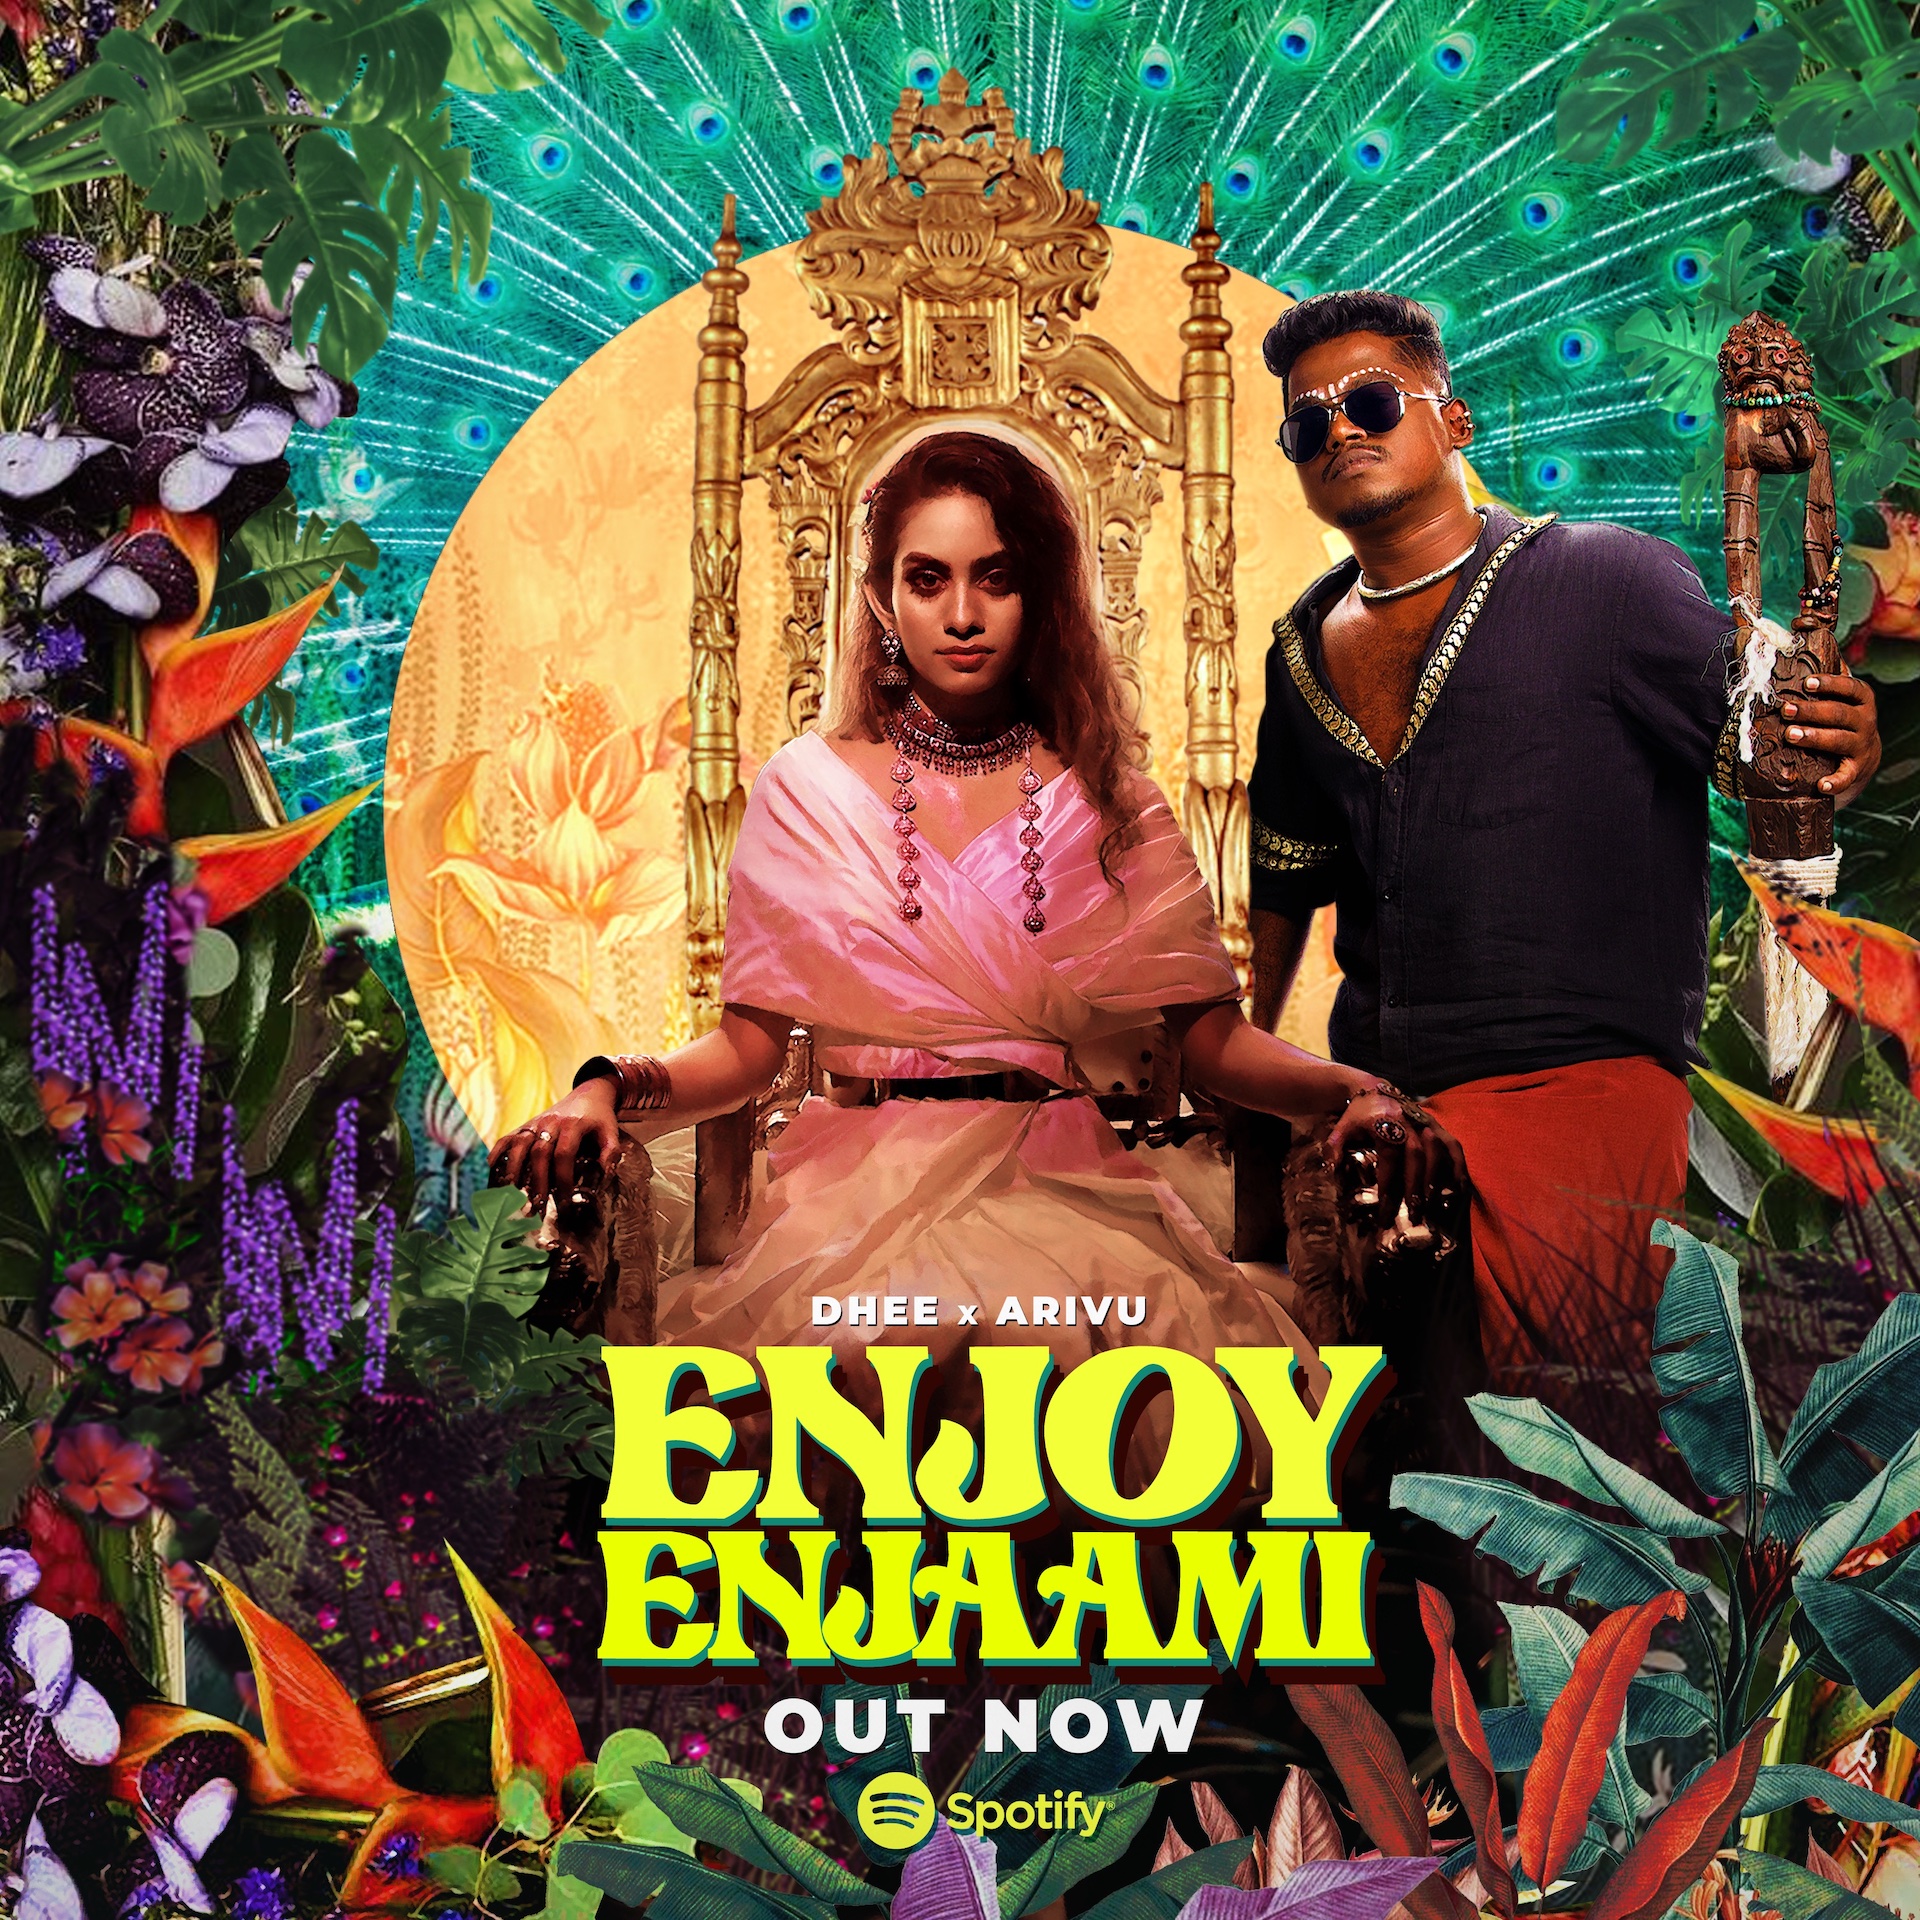 Method in music: Why Enjoy Enjaami stands out in talking about environment